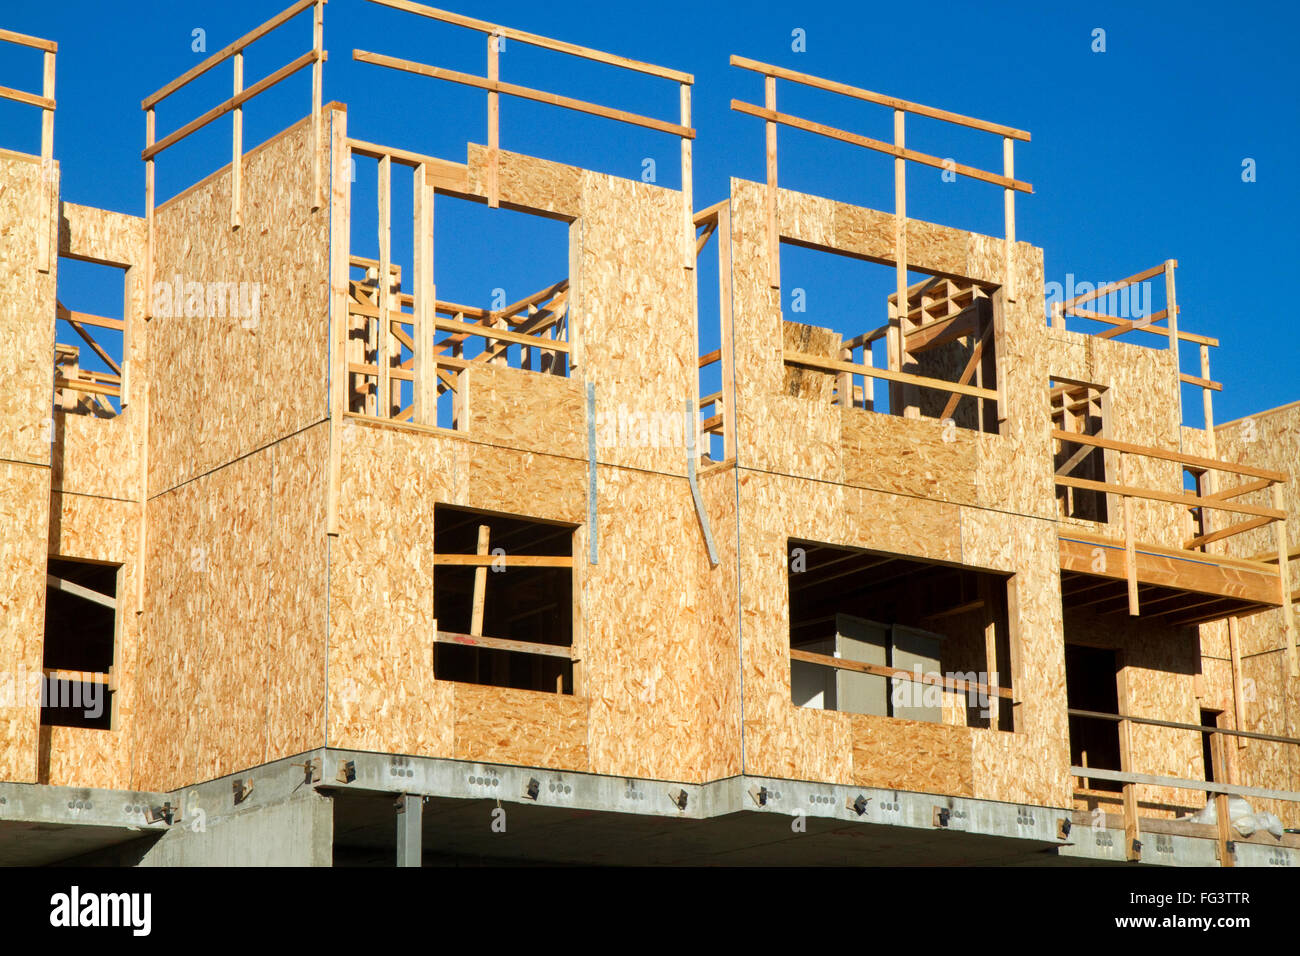 Wood lumber construction of an apartment building in Boise, Idaho, USA. Stock Photo